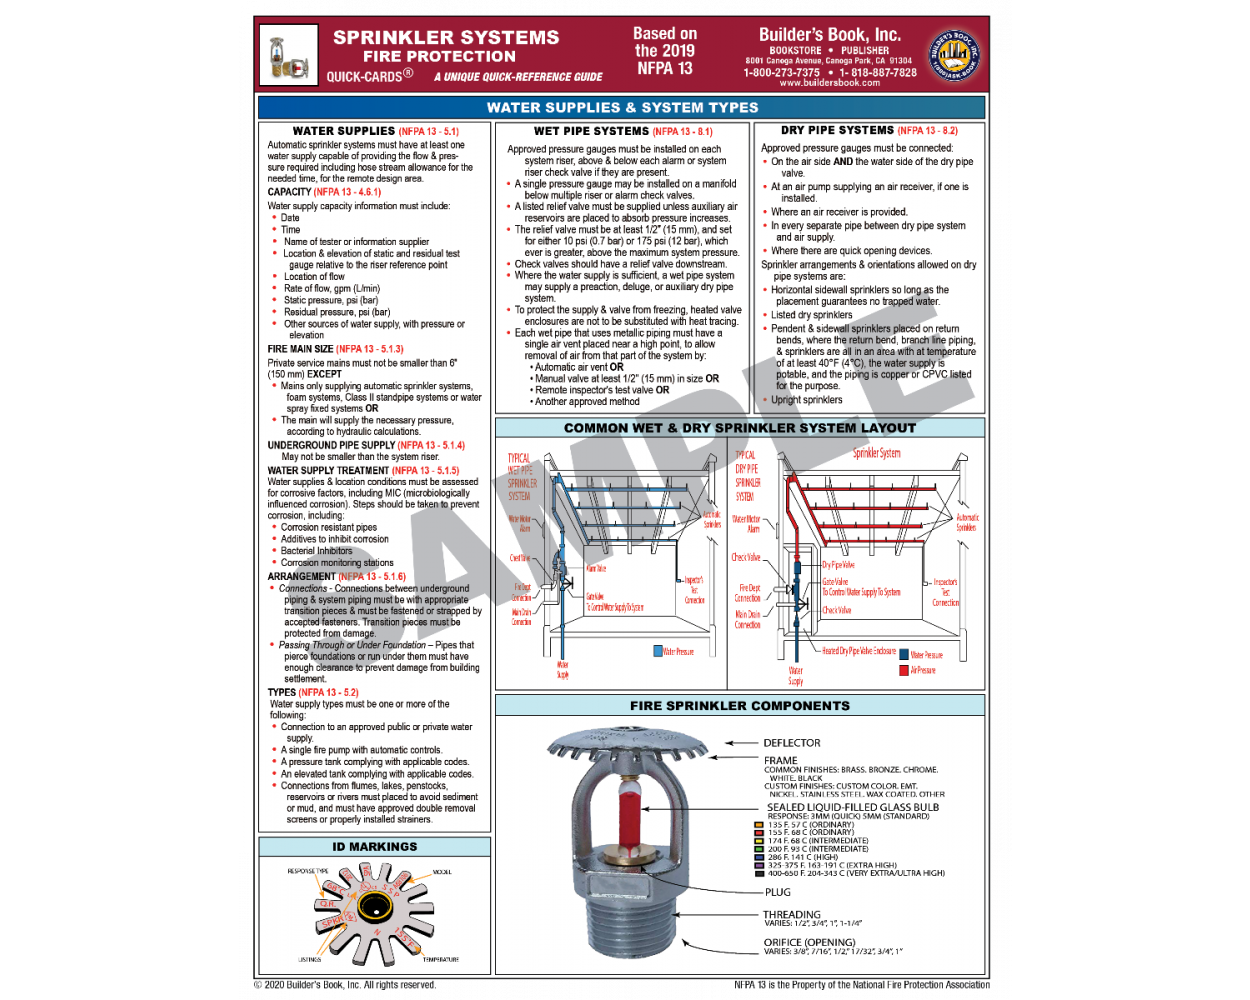 Sprinkler Systems Fire Protection